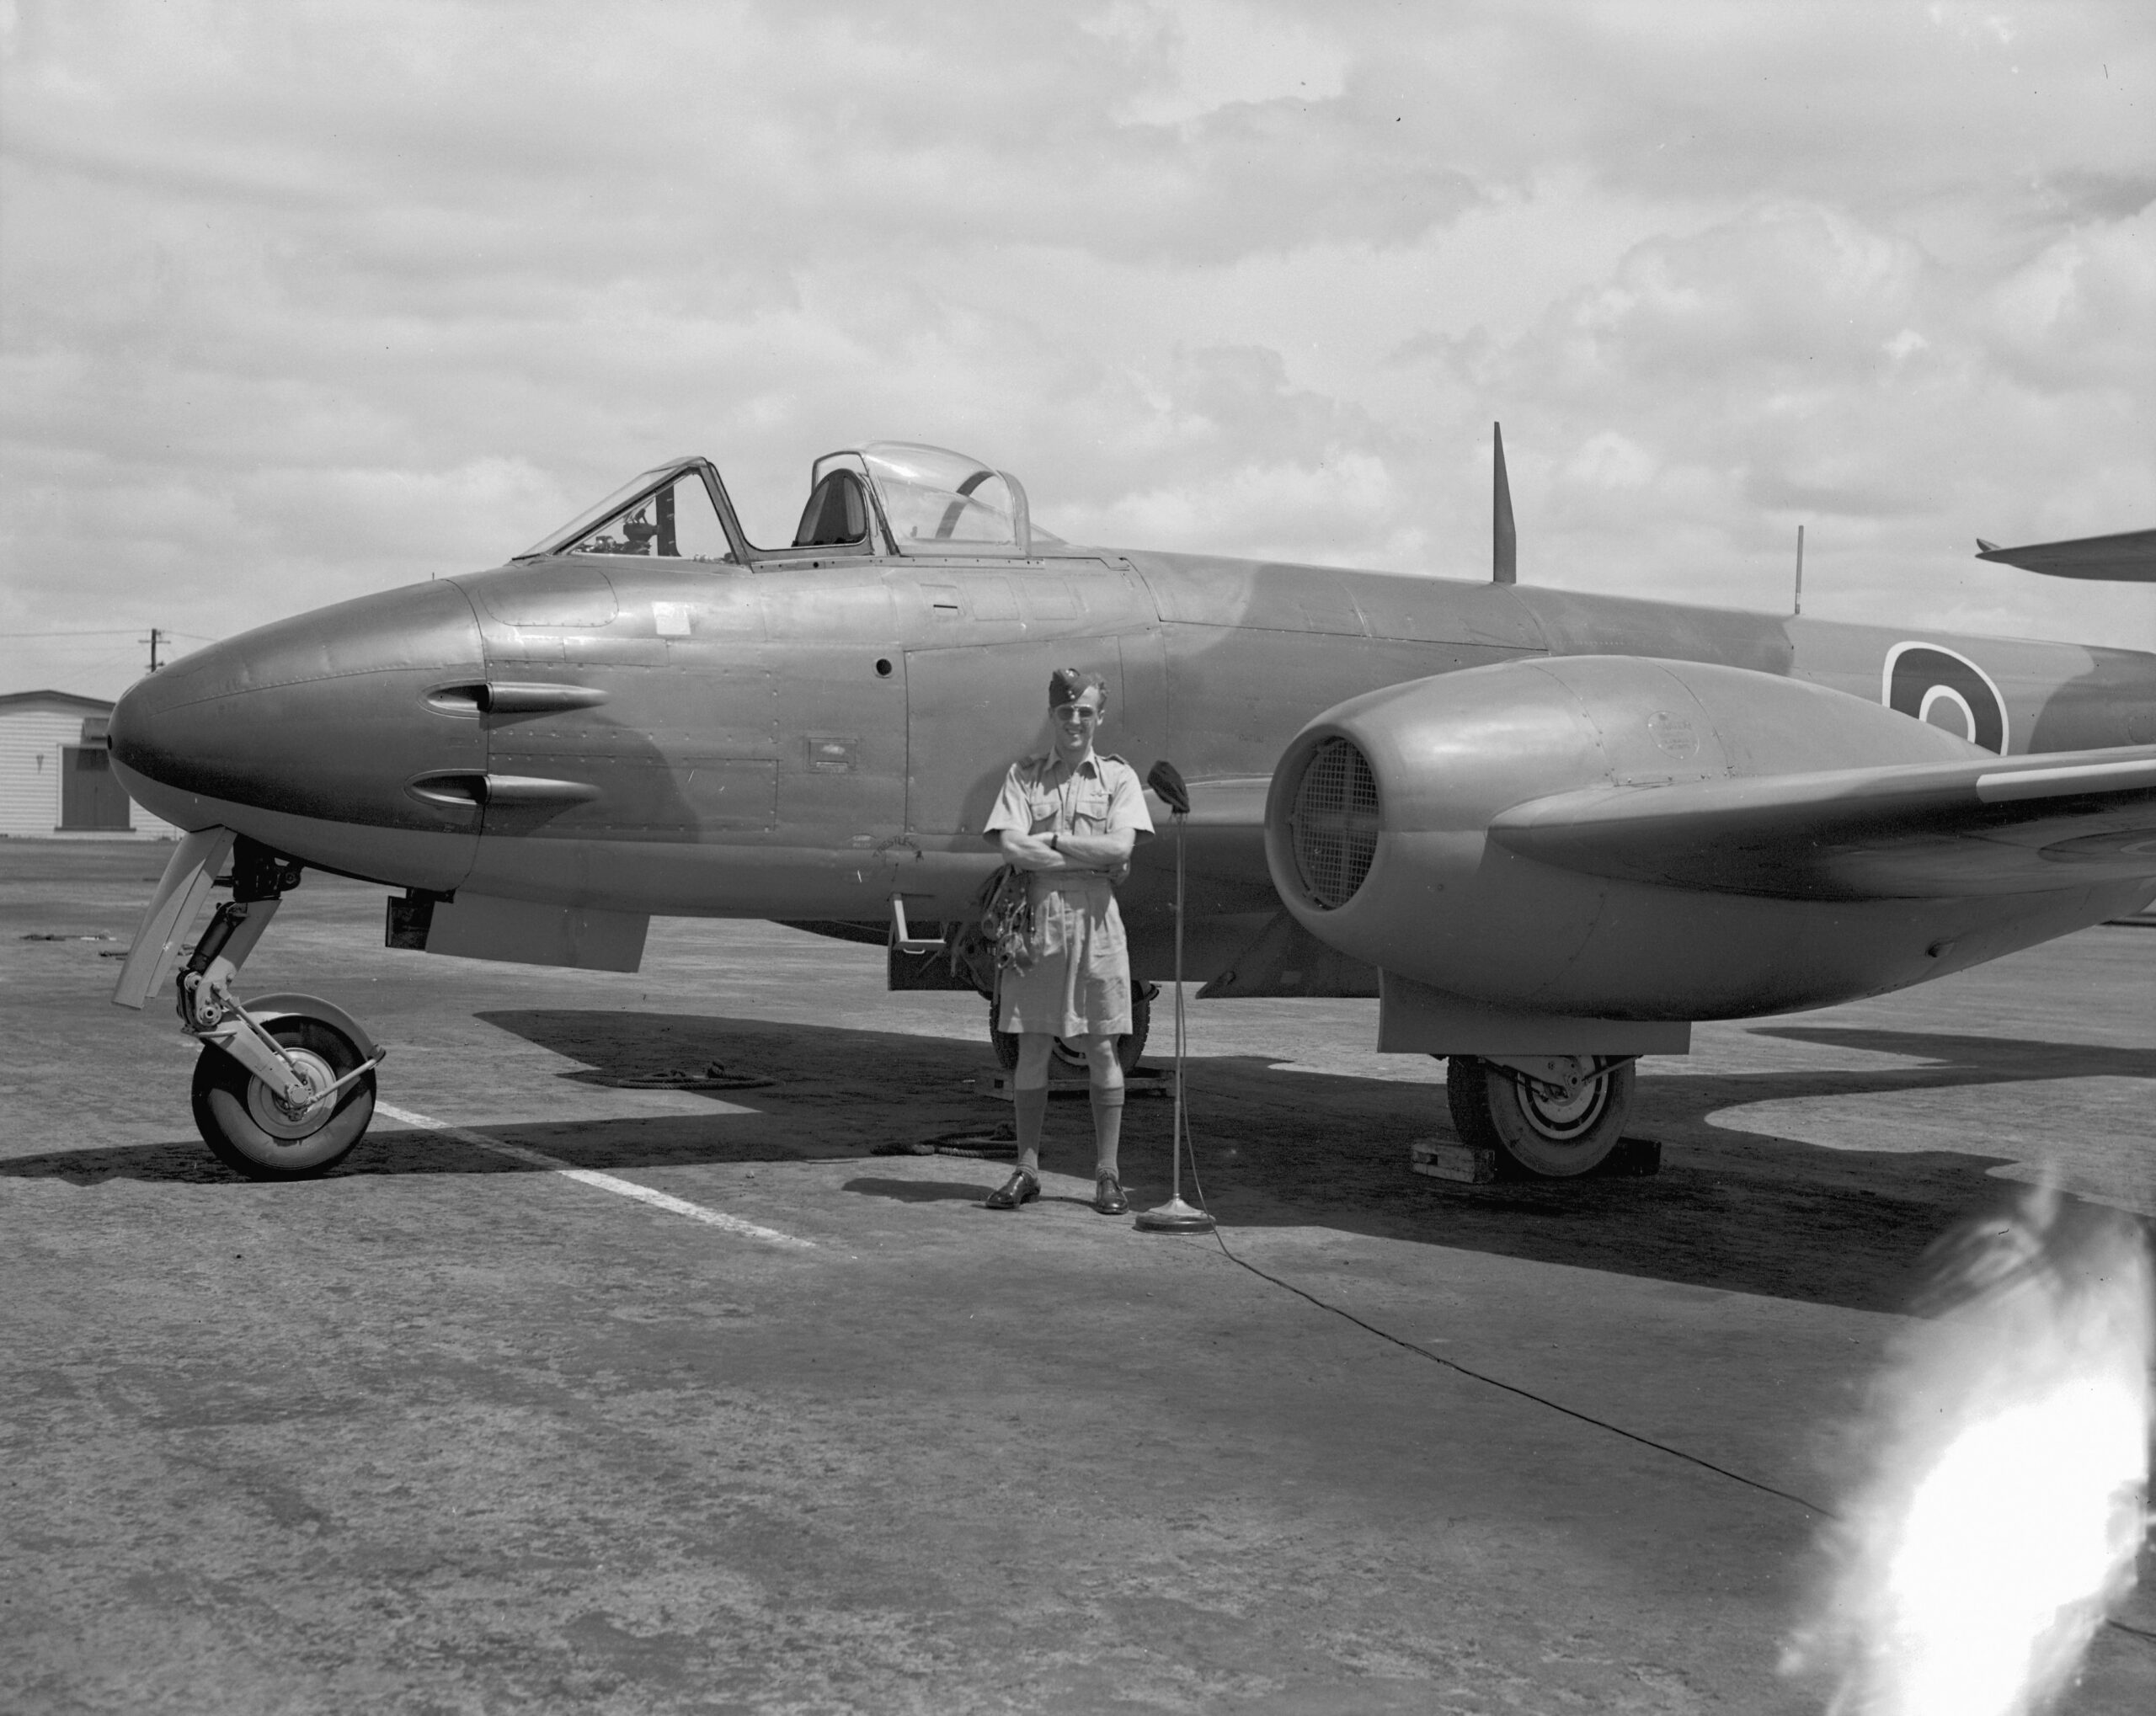 Arrival of Meteor NZ6001 at RNZAF Station Ardmore at the start of a tour of New Zealand, flown by Squadron Leader RM McKay, pictured here standing beside his aircraft. 15 February 1946. Image ref ArdG1155_46, RNZAF Official.